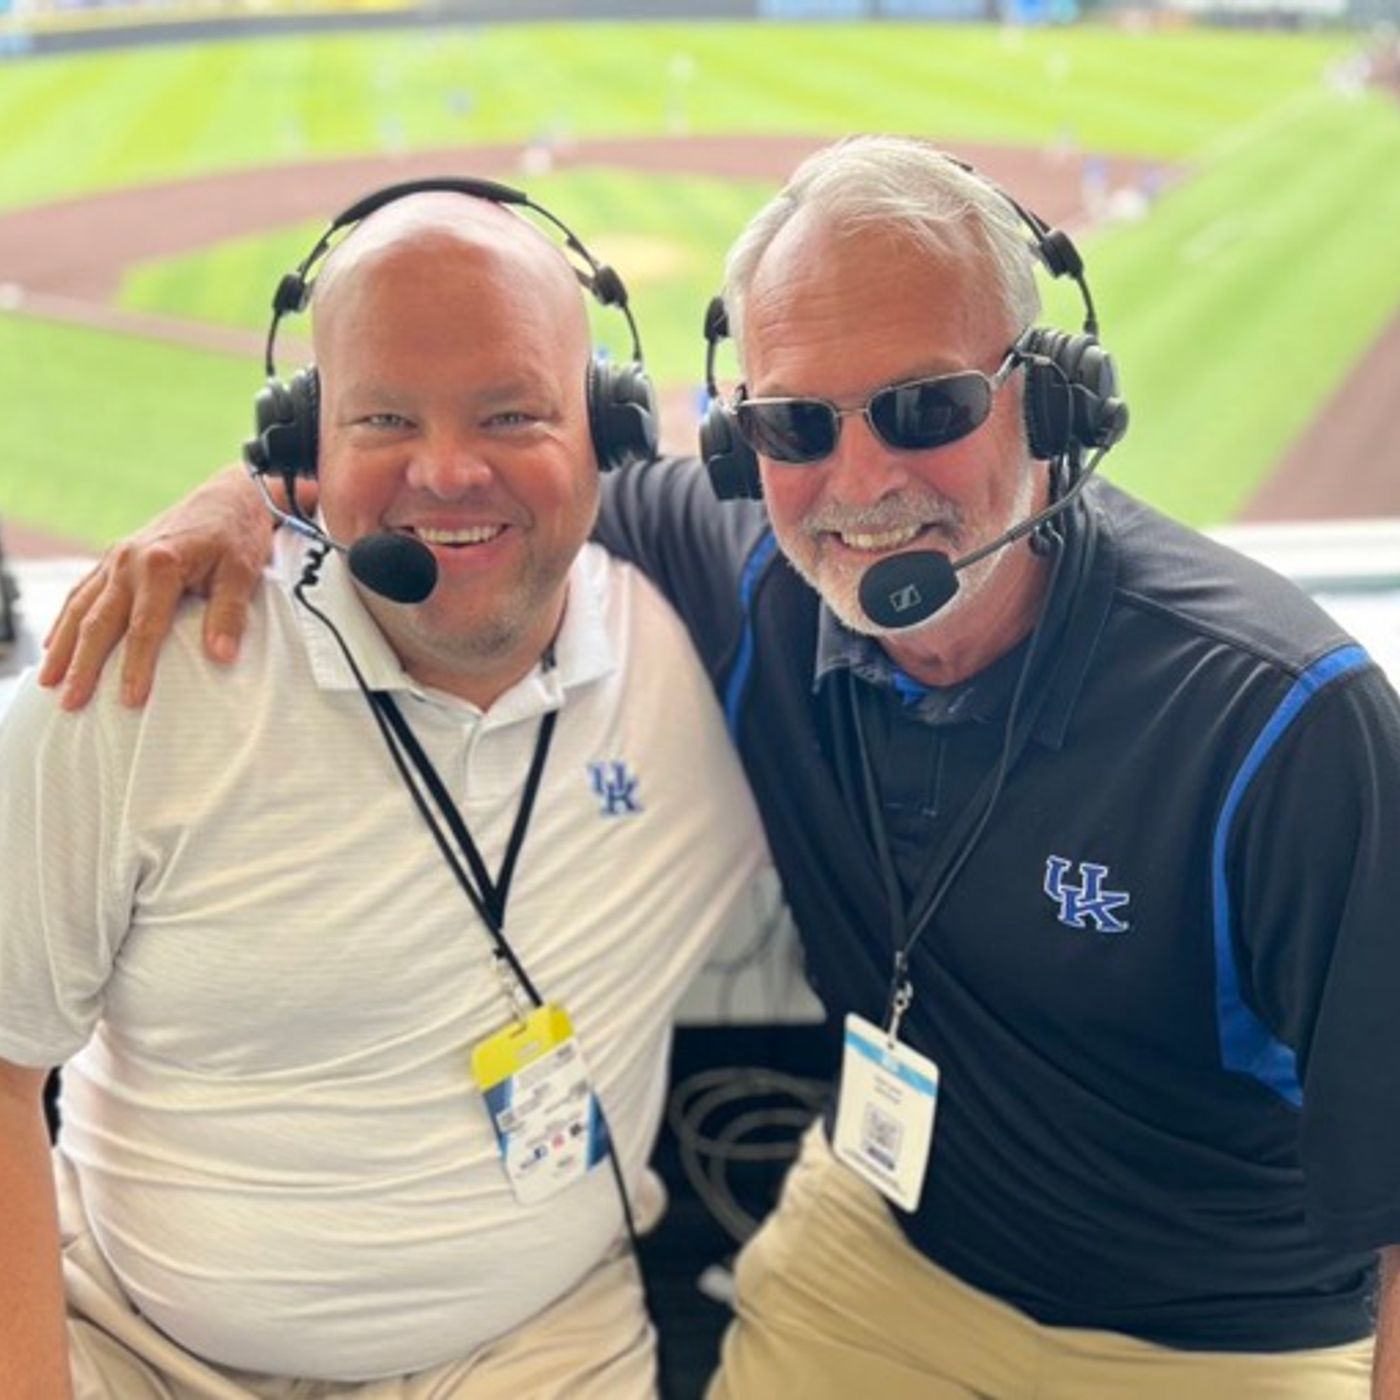 Keith Madison on what a CWS would mean to Kentucky Baseball